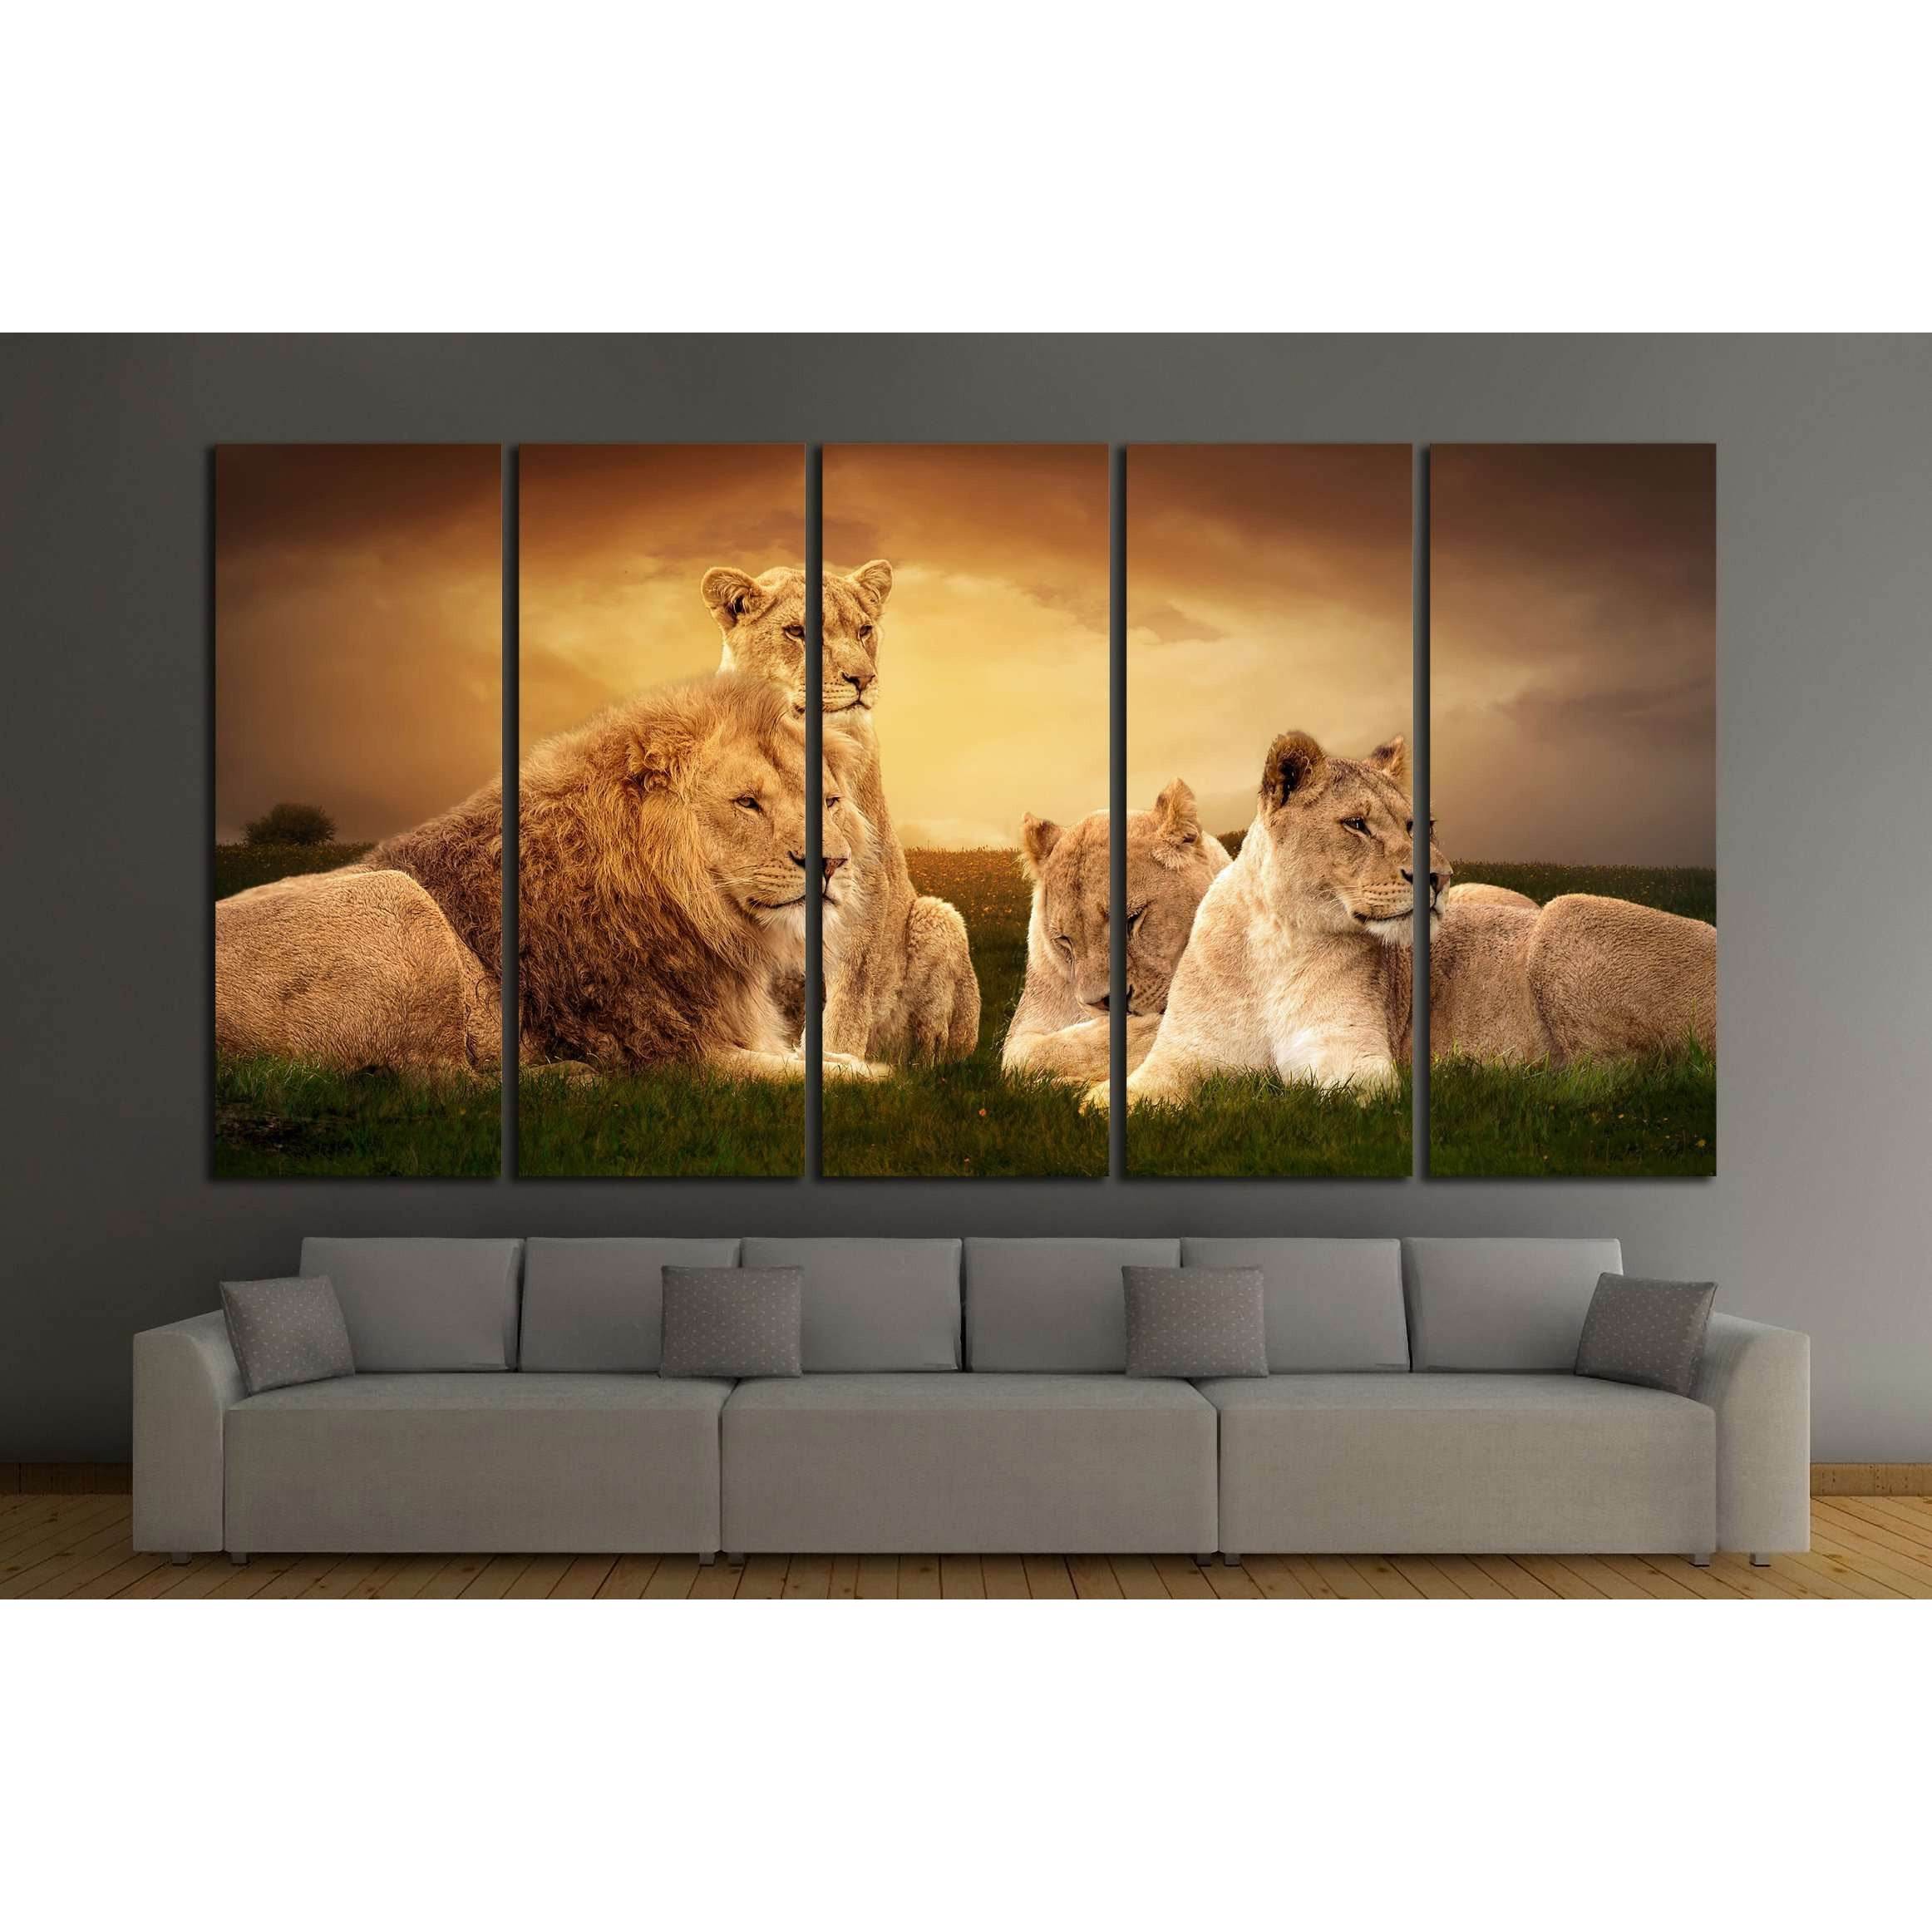 Lion Photography Wall Art PrintDecorate your walls with a stunning Lion Canvas Art Print from the world's largest art gallery. Choose from thousands of Lion artworks with various sizing options. Choose your perfect art print to complete your home decorati